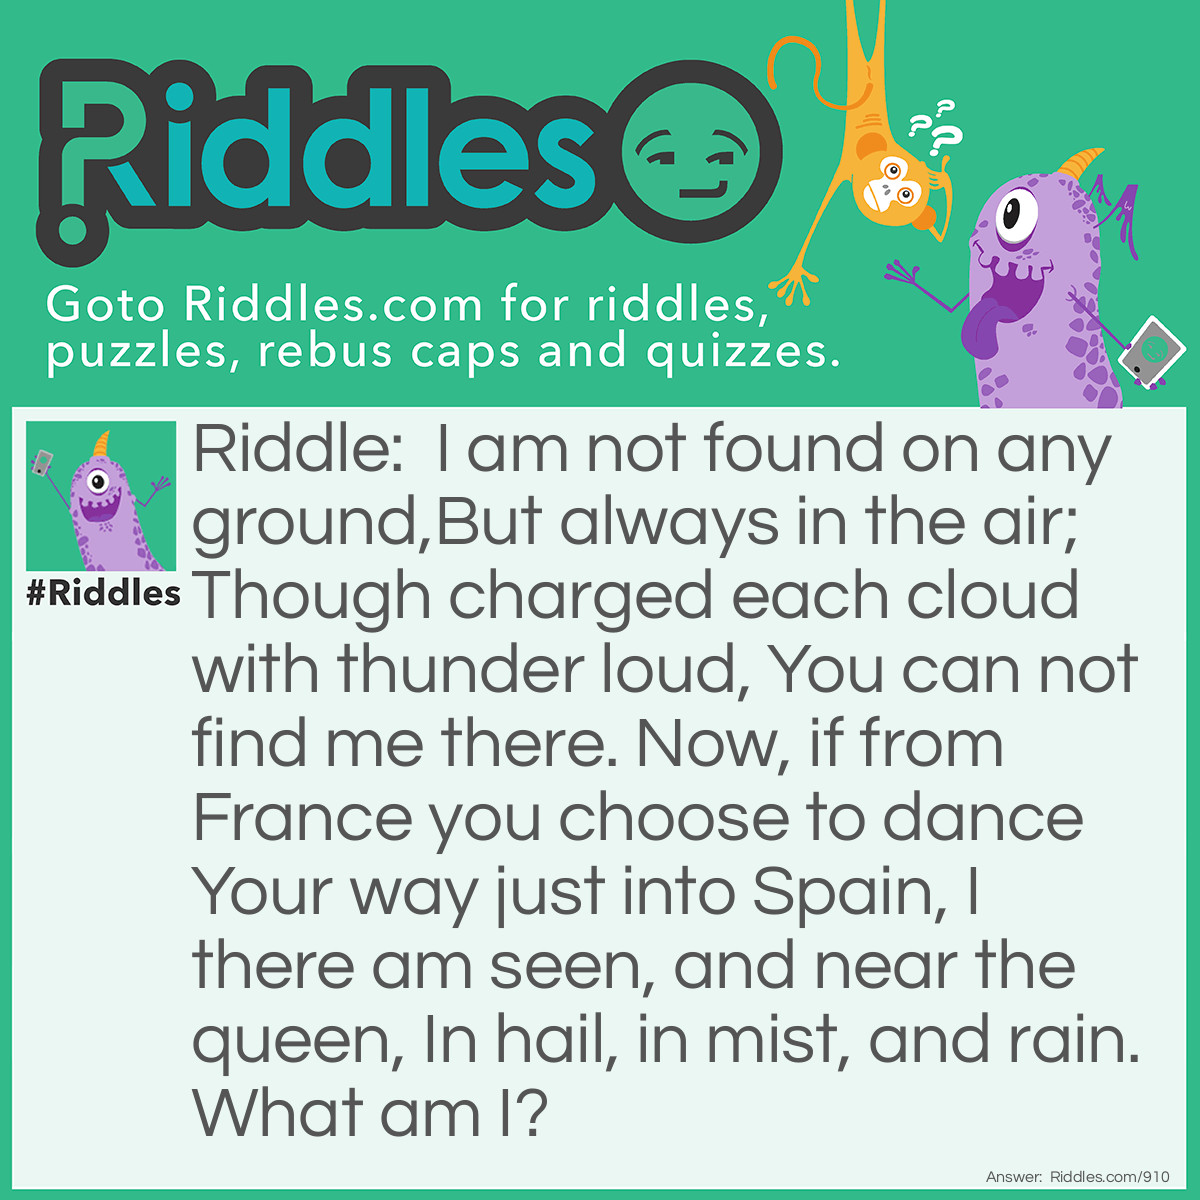 Riddle: I am not found on any ground,But always in the air; Though charged each cloud with thunder loud, You can not find me there. Now, if from France you choose to dance Your way just into Spain, I there am seen, and near the queen, In hail, in mist, and rain.
What am I? Answer: The letter I.